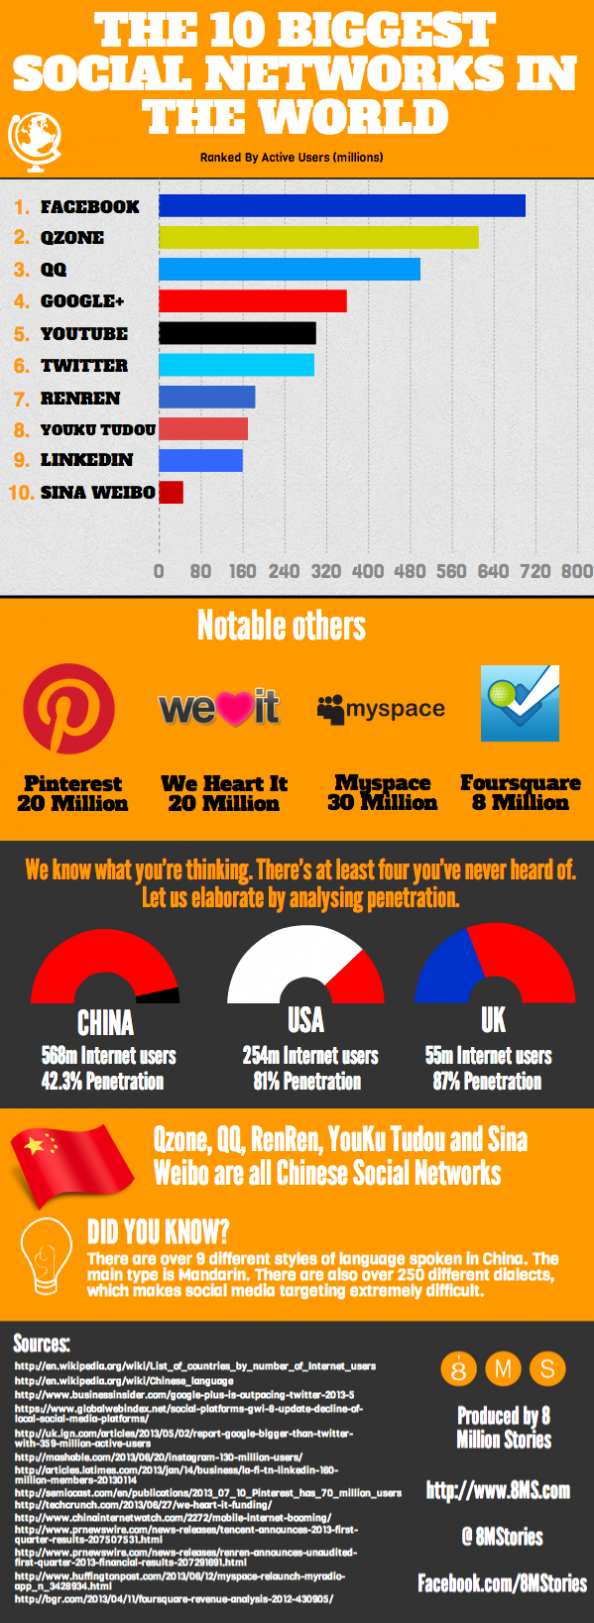 the-10-biggest-social-networks-in-the-world_51f651b05cc3a_w594